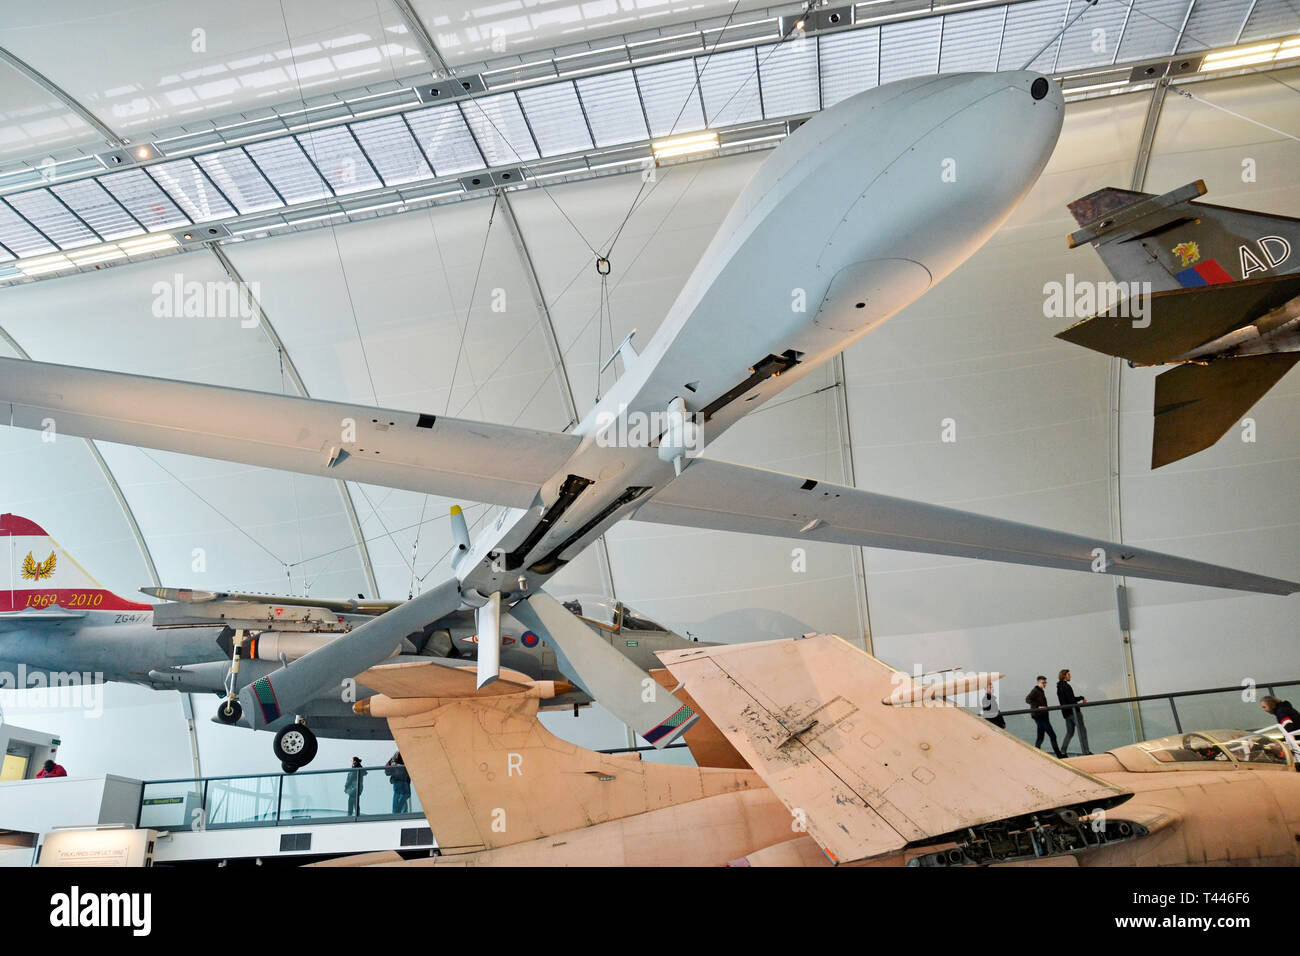 General Atomics MQ-1 Predator. Military drone at the RAF Museum, London, UK. The RAF's first remotely piloted drones. Stock Photo